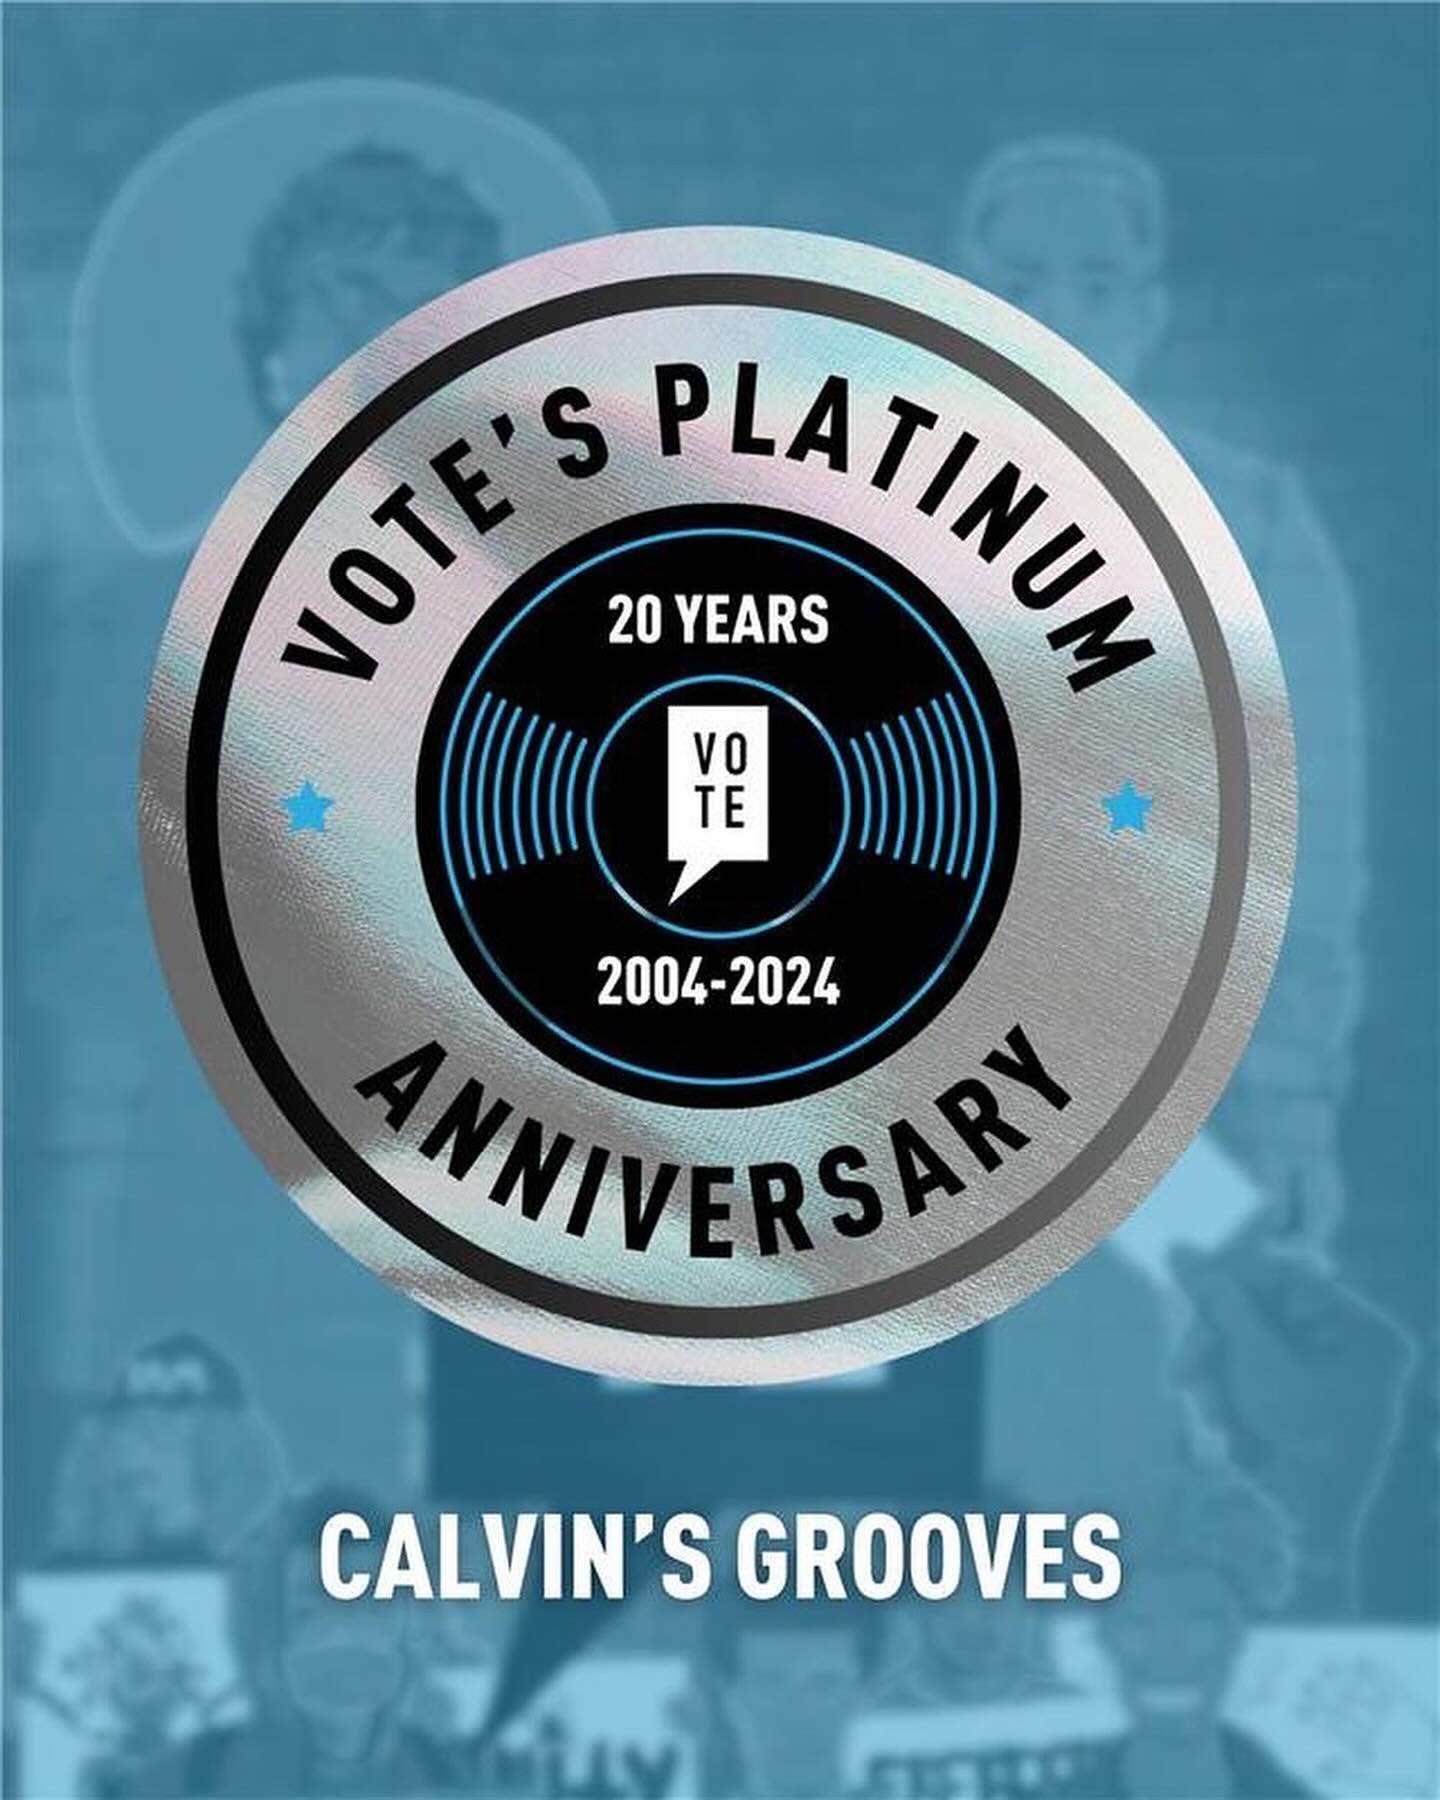 🎶 Are you ready for VOTE&rsquo;s April Platinum Playlist? These 20 songs are handpicked by VOTE&rsquo;s Director of Light of Justice Program, Calvin Duncan! 

Calvin is a VOTE OG and co-founder of the Angola Special Civics Project. He inspires us to